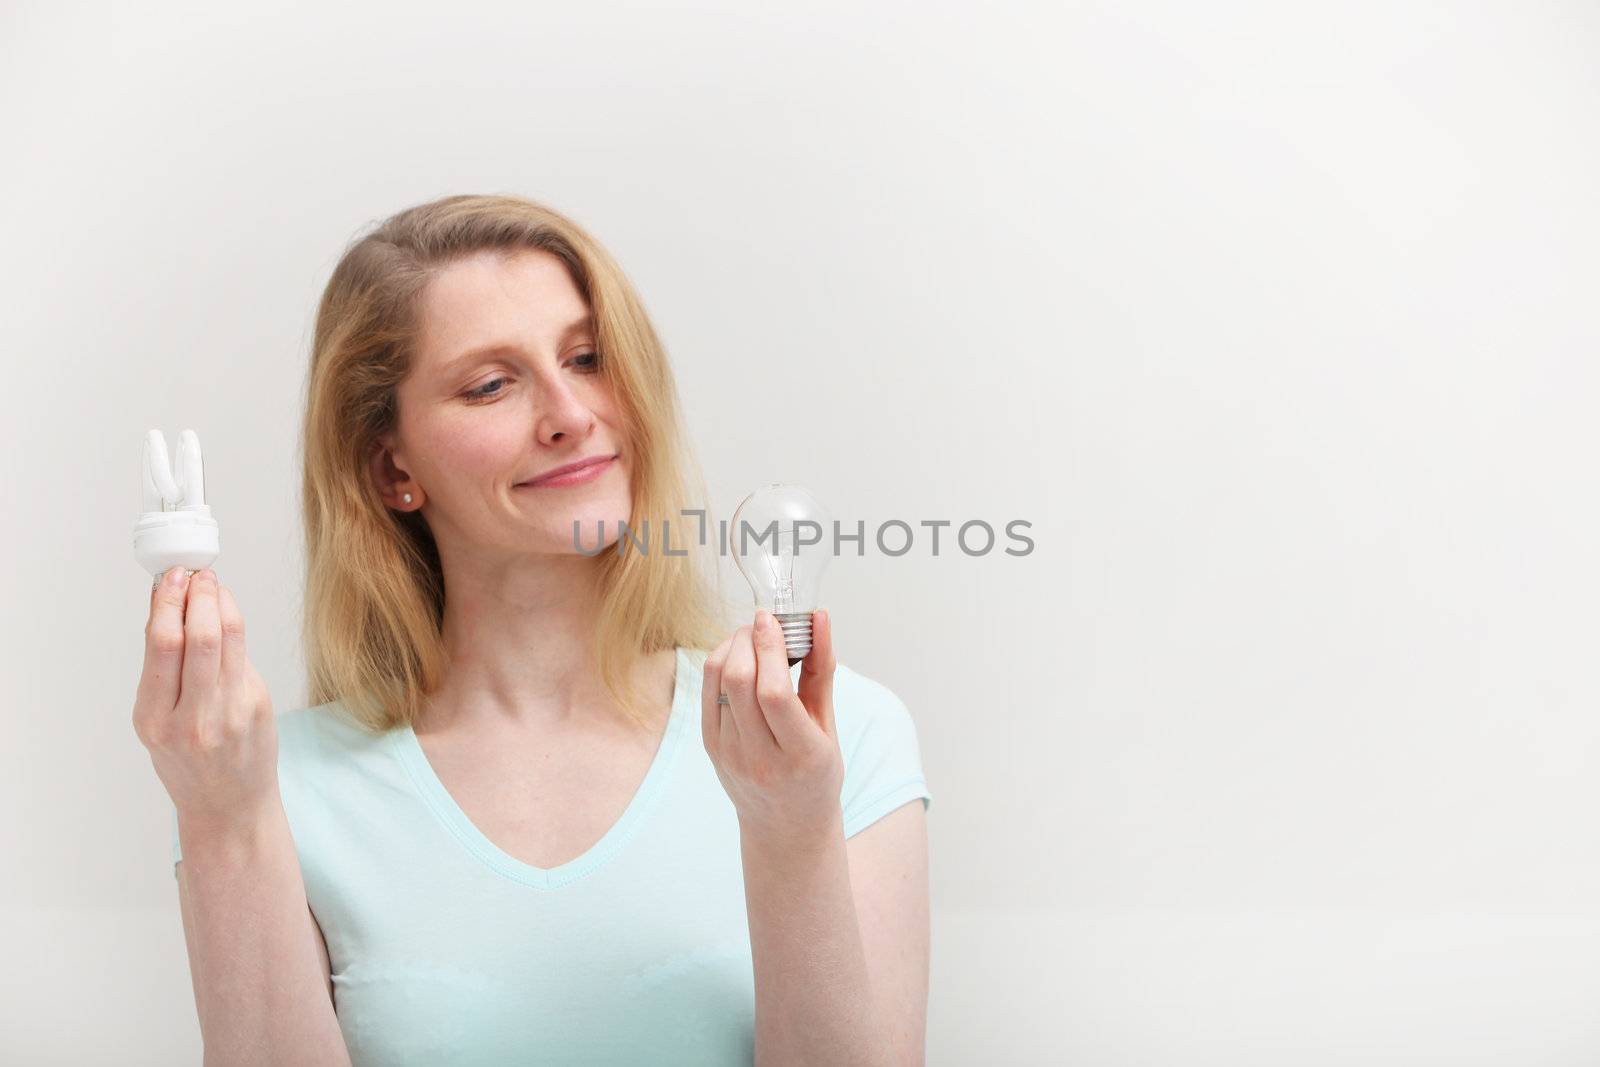 Woman holding an eco-friendly spiral fluorescent bulb in one hand looks at an old inefficient incandescent bulb in her other hand with regret as she makes her choice